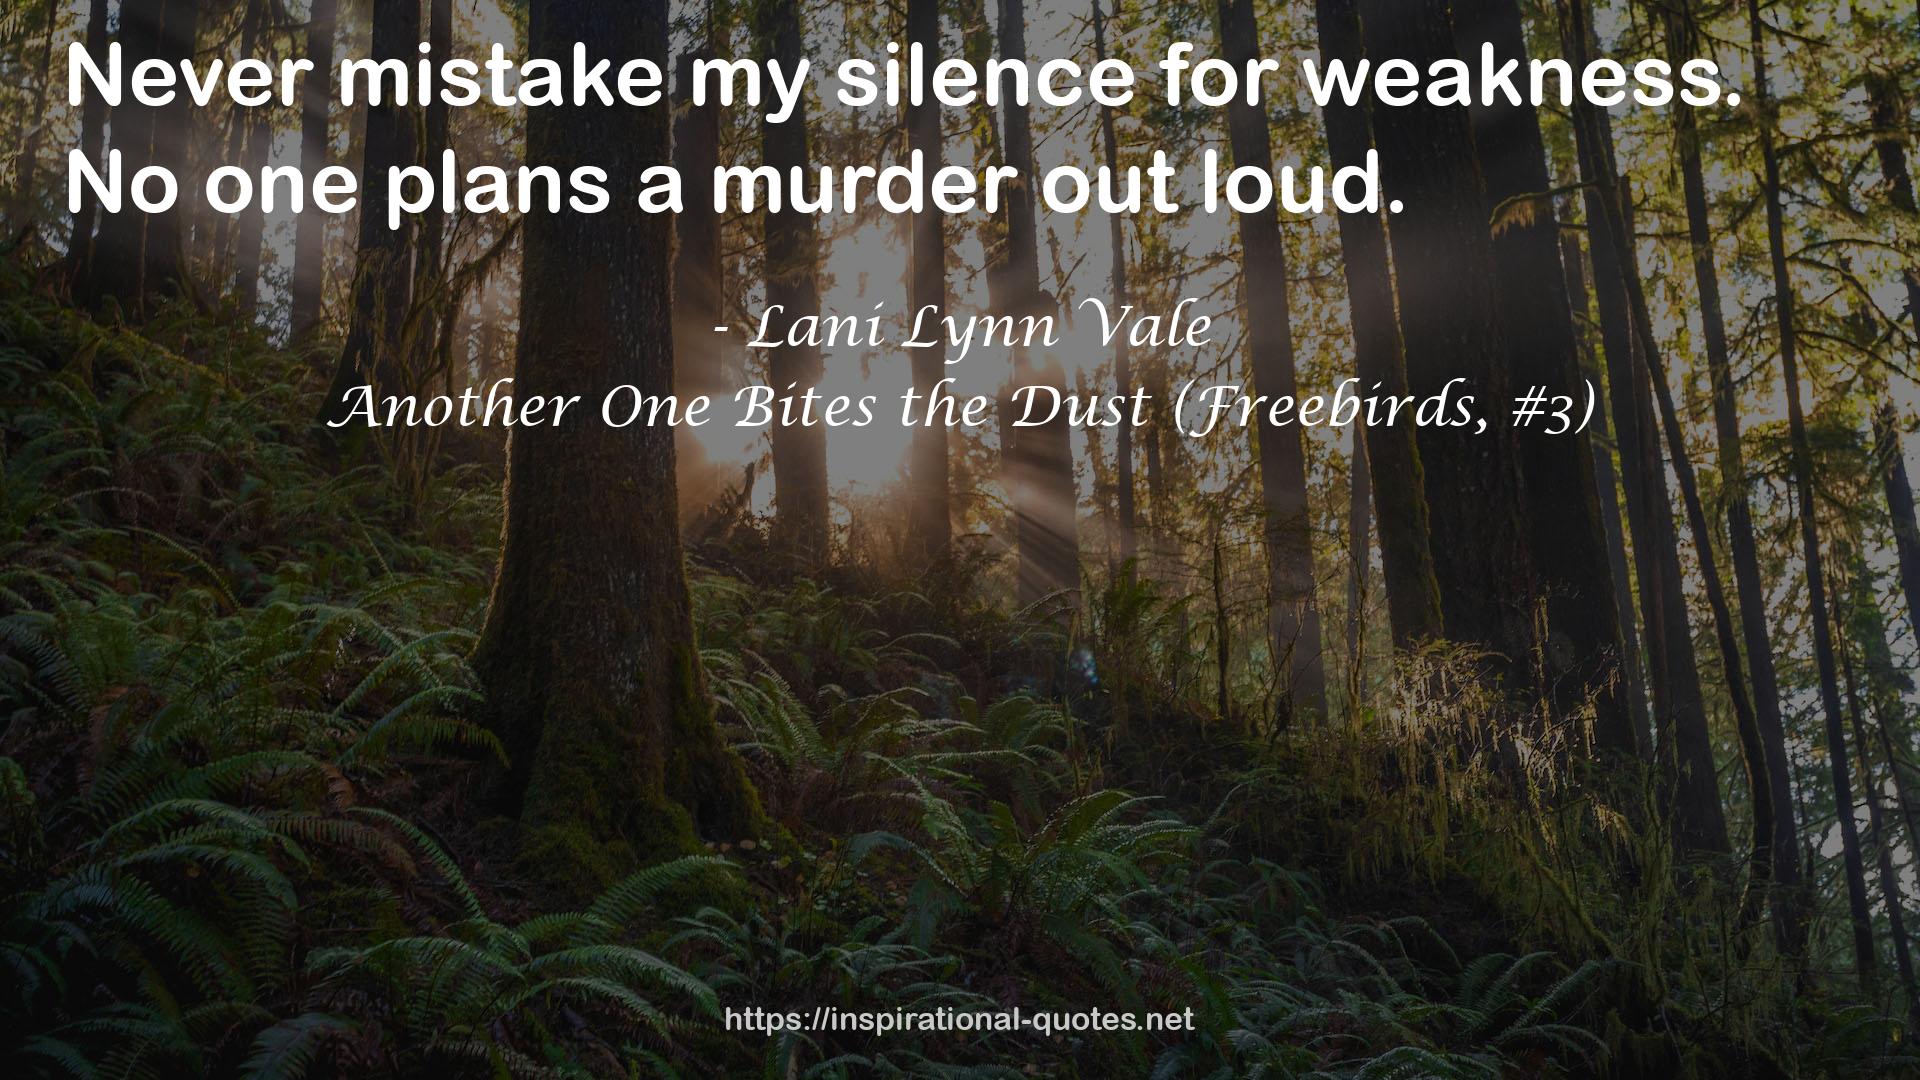 Another One Bites the Dust (Freebirds, #3) QUOTES